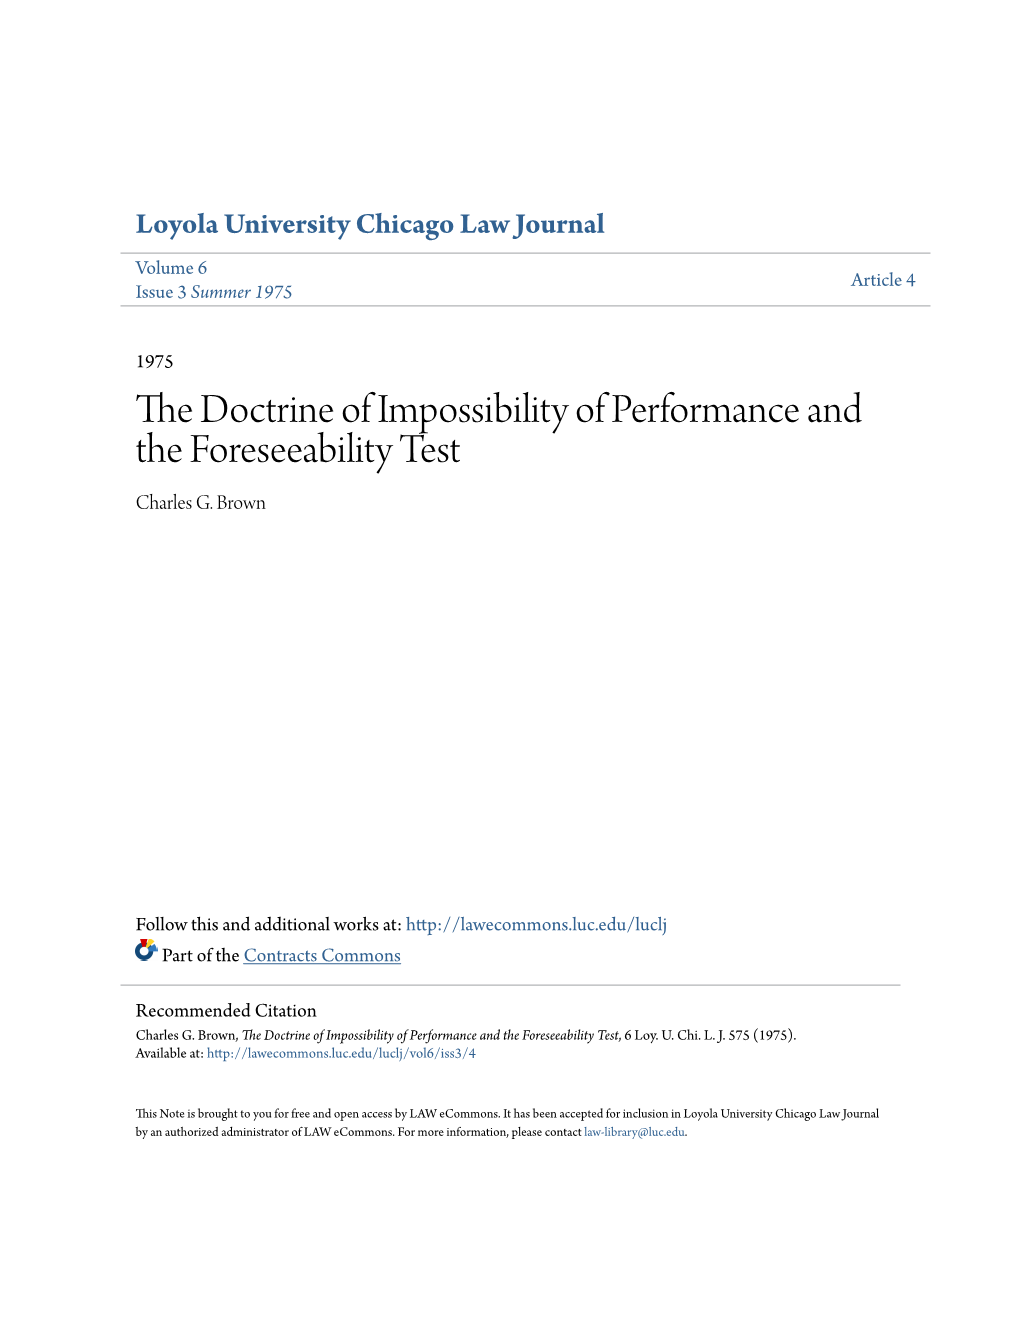 The Doctrine of Impossibility of Performance and the Foreseeability Test, 6 Loy